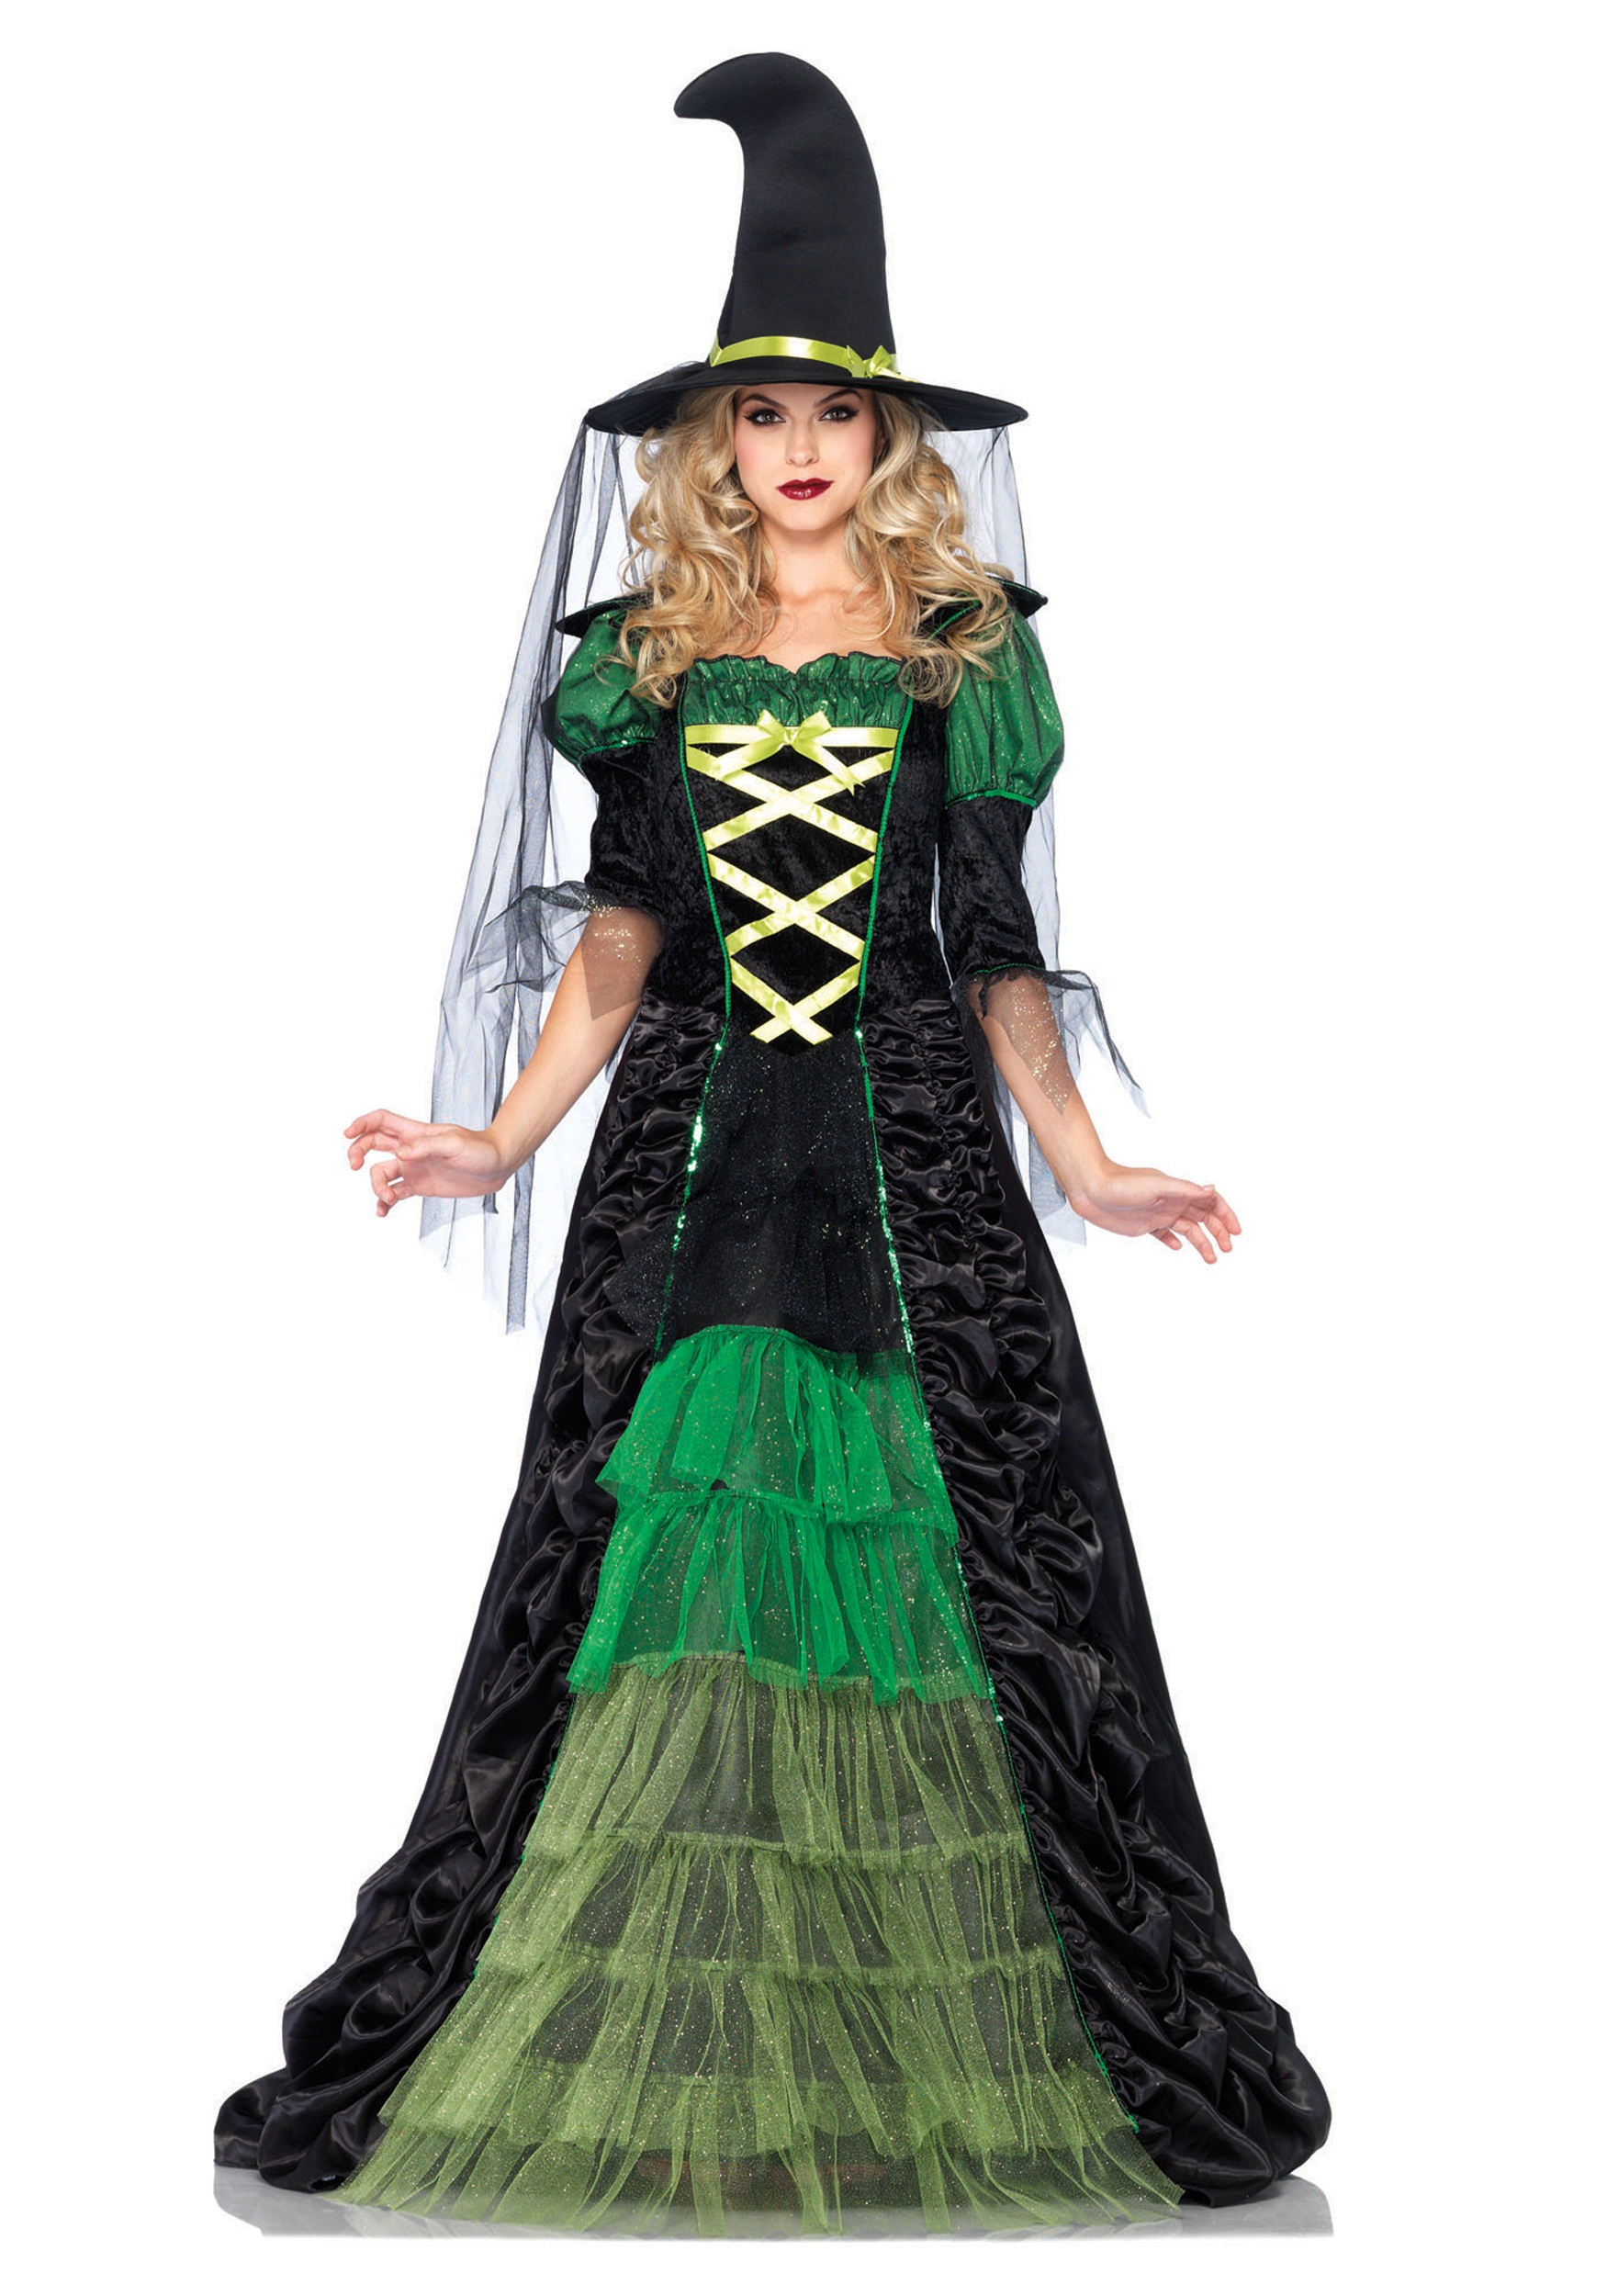 Image of Storybook Witch Adult Costume ID LE85240-M/L